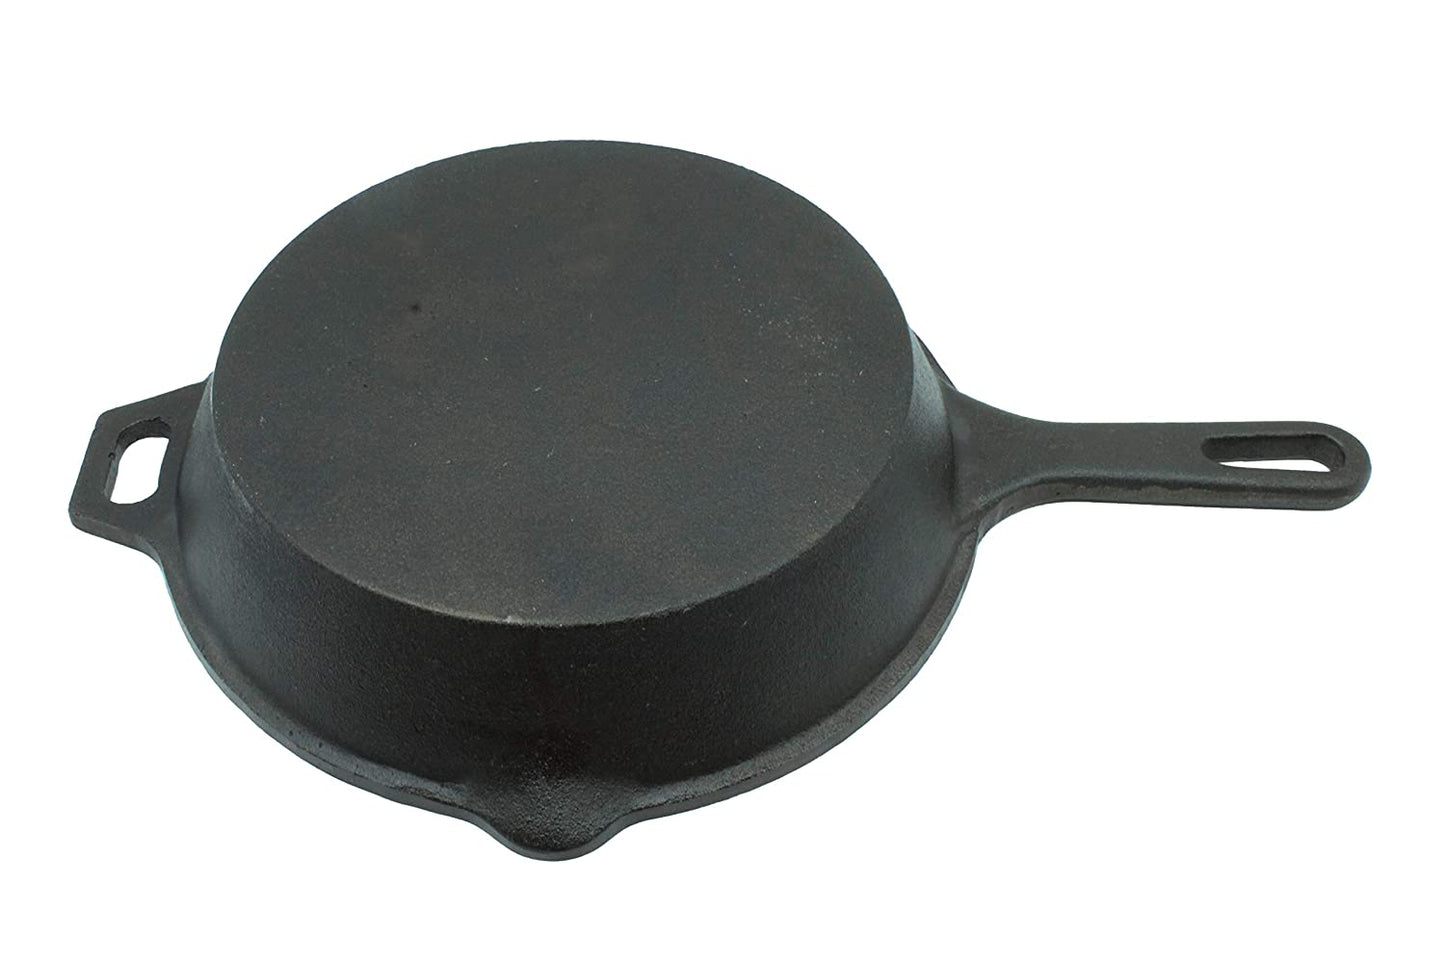 Pre-Seasoned Cast Iron Skillet | Fry Pan 10.25 Inch | 26 cm (Induction Compatible)